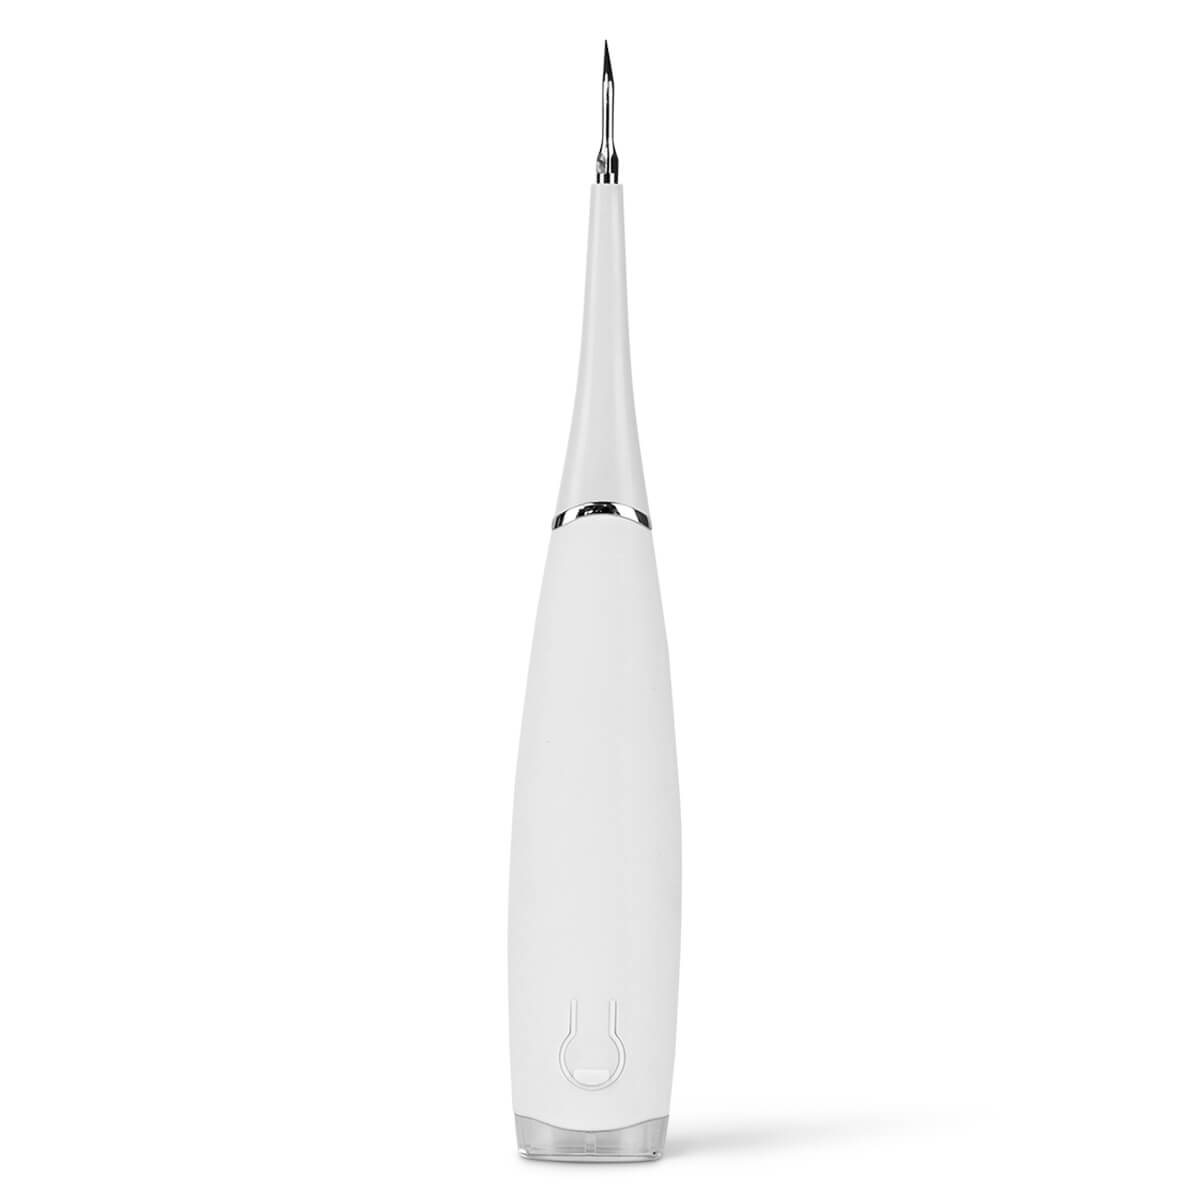 Ultrasonic Tooth Cleaner - Plaque Remover - Smile Therapy